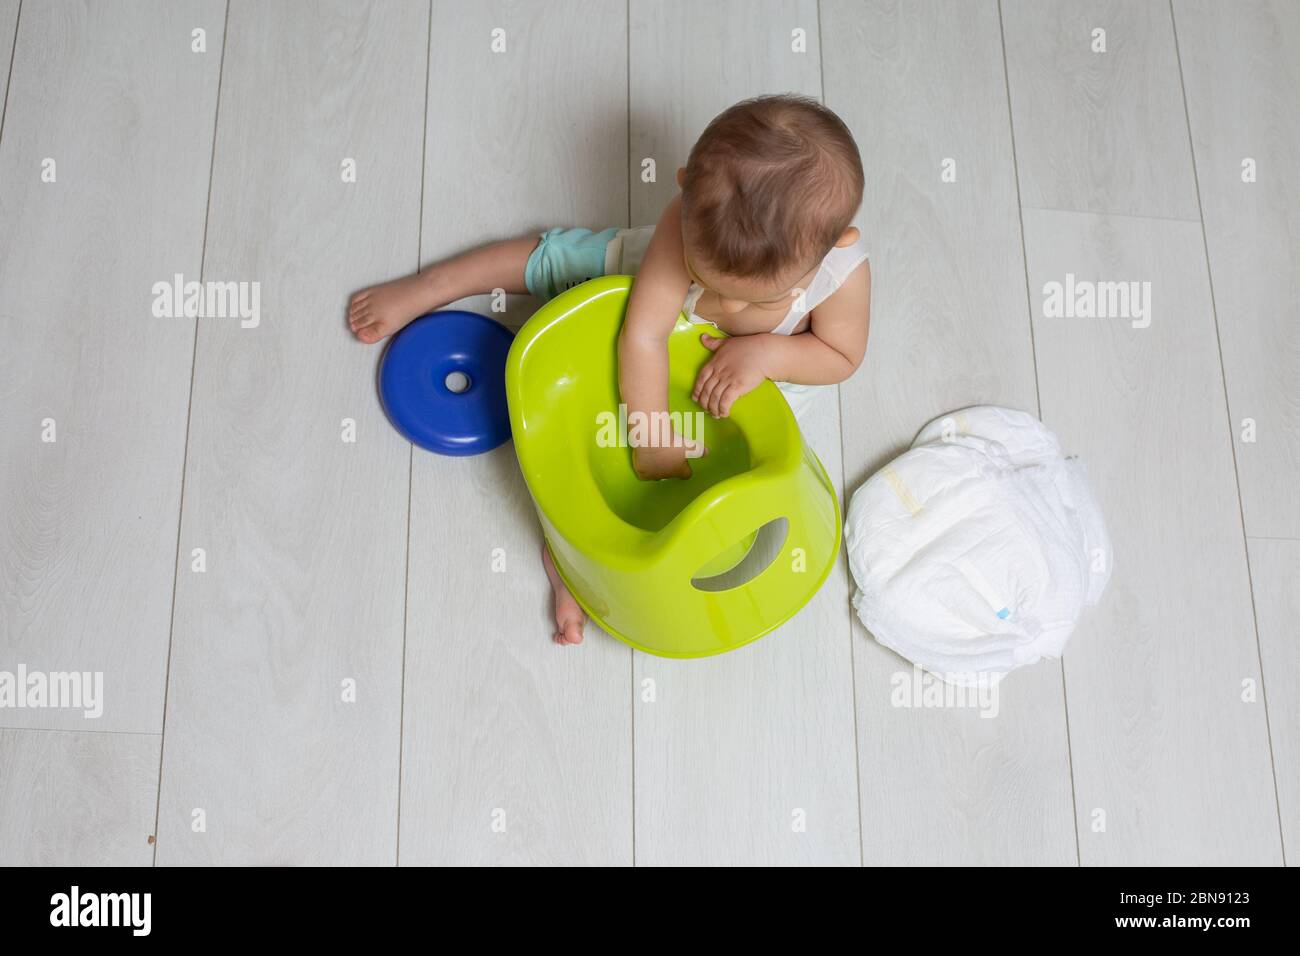 The concept of training the chamber-pot. little cute baby sits on the floor, holds a green pot and looks into it. next to it are clean diapers and Stock Photo